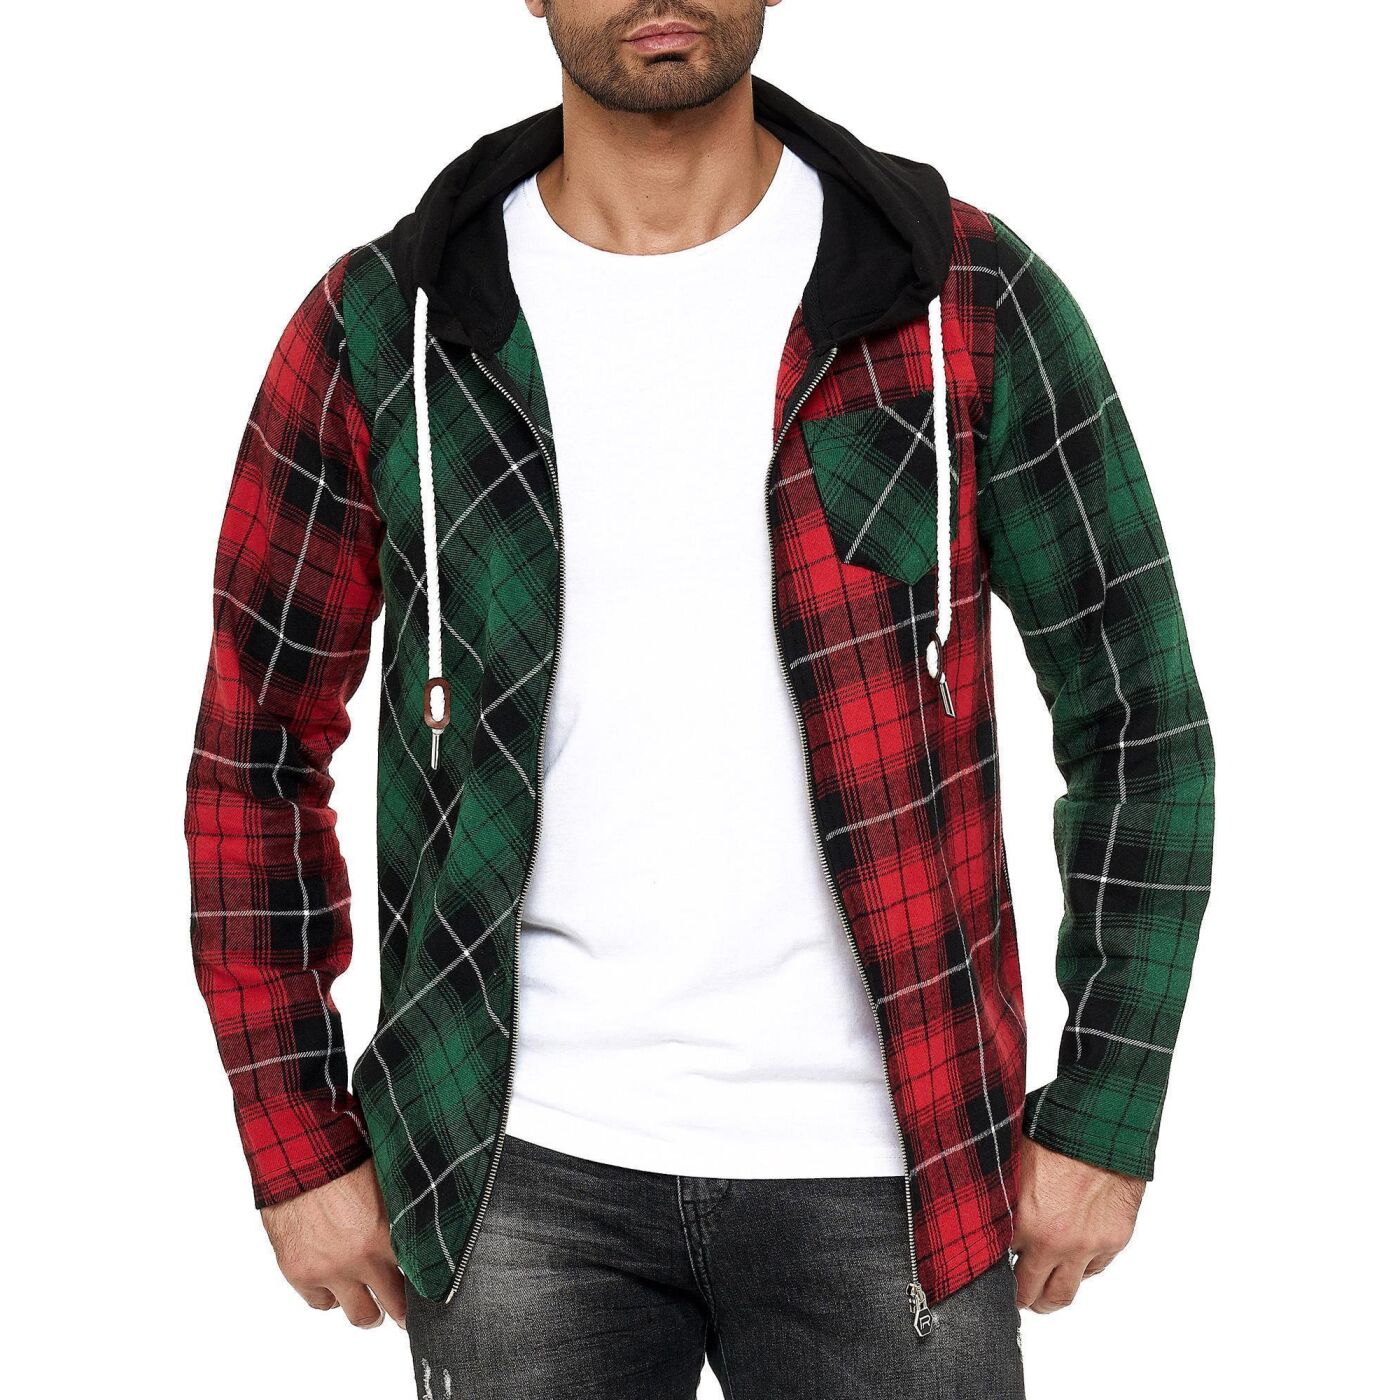 44,90 Sweatshirt checkere, Sweat with mens Jacket hooded Red € Pullover Bridge